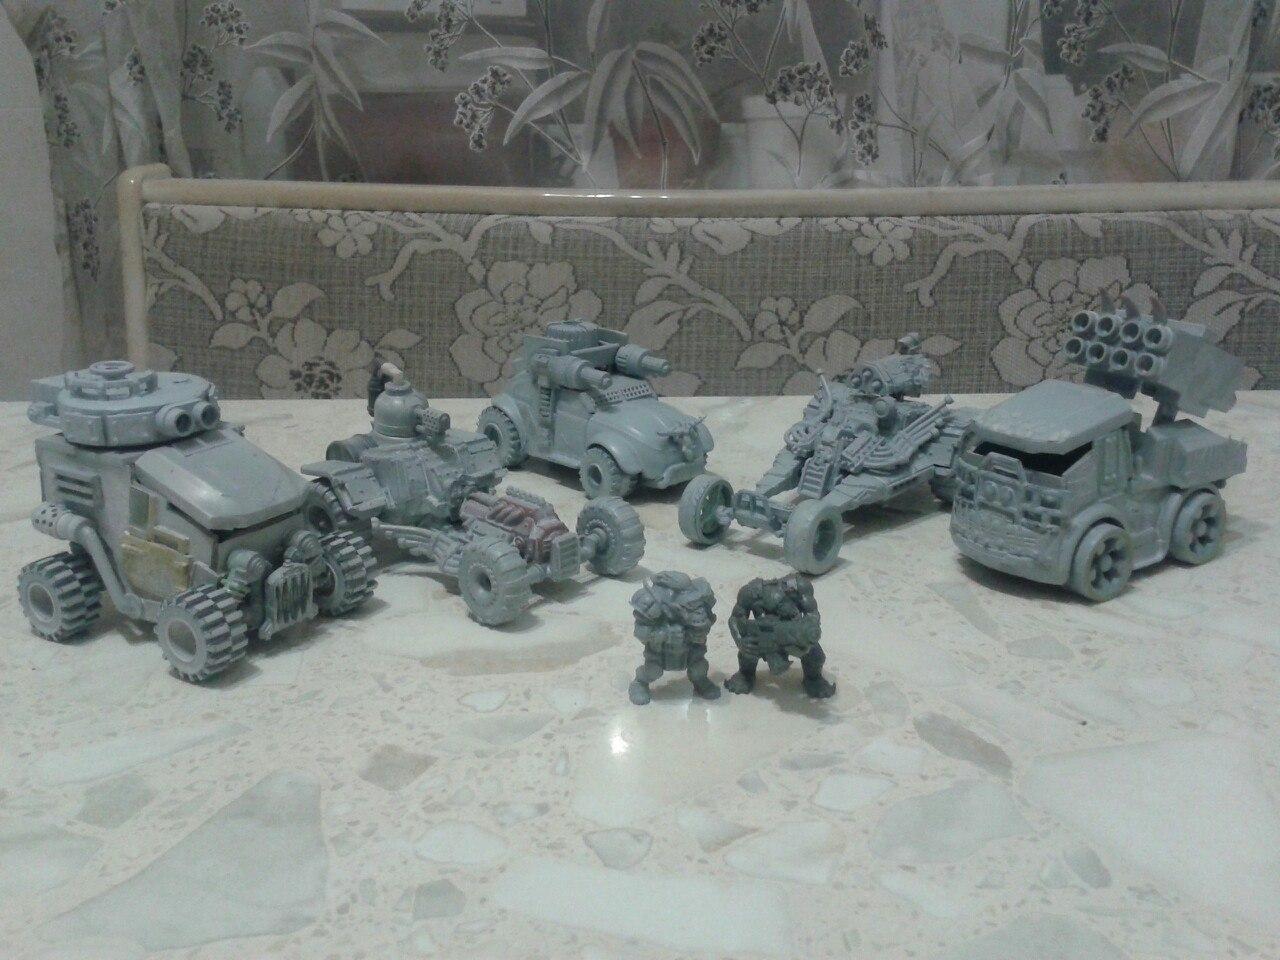 Buggy, Conversion, Orks, Toy